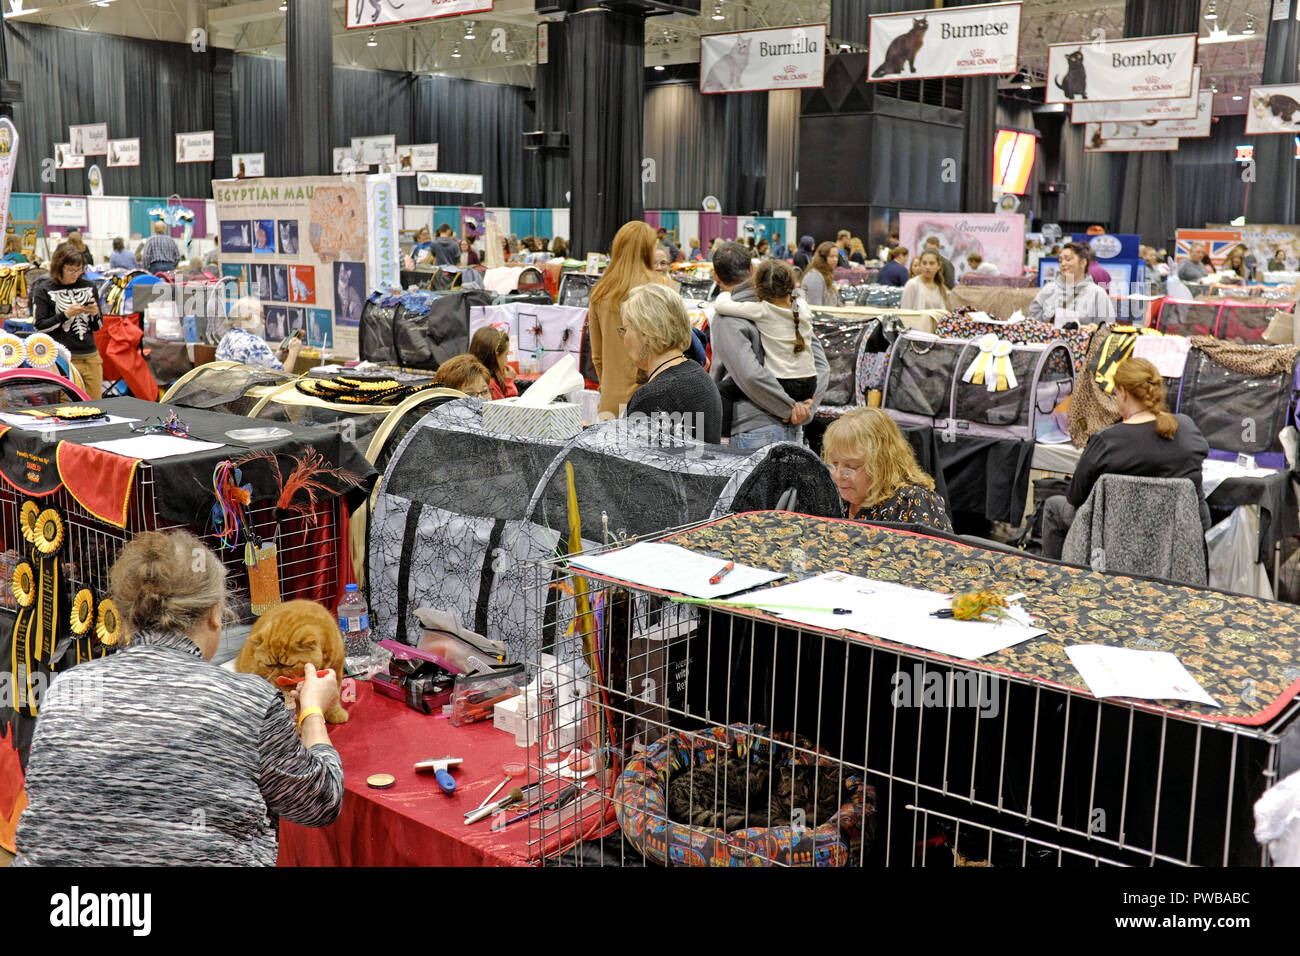 Cleveland, Ohio, USA, 14th Oct, 2018.  Participants and spectators at the 2018 Cat Fancier's Association International Cat Show create a hive of energy in the Cleveland IX Center.  Rows of cat show benching cages are organized by breed as signs hanging from the ceiling give show participants, and visitors, visual cues as to where certain breeds are being prepped for their competitions.  A cat owner feeds her cat in a benching area which is also used for grooming of her pedigreed feline.  With up to 1,000 pedigreed cats including up to 41 breeds, the competition is the largest of its kind. Stock Photo